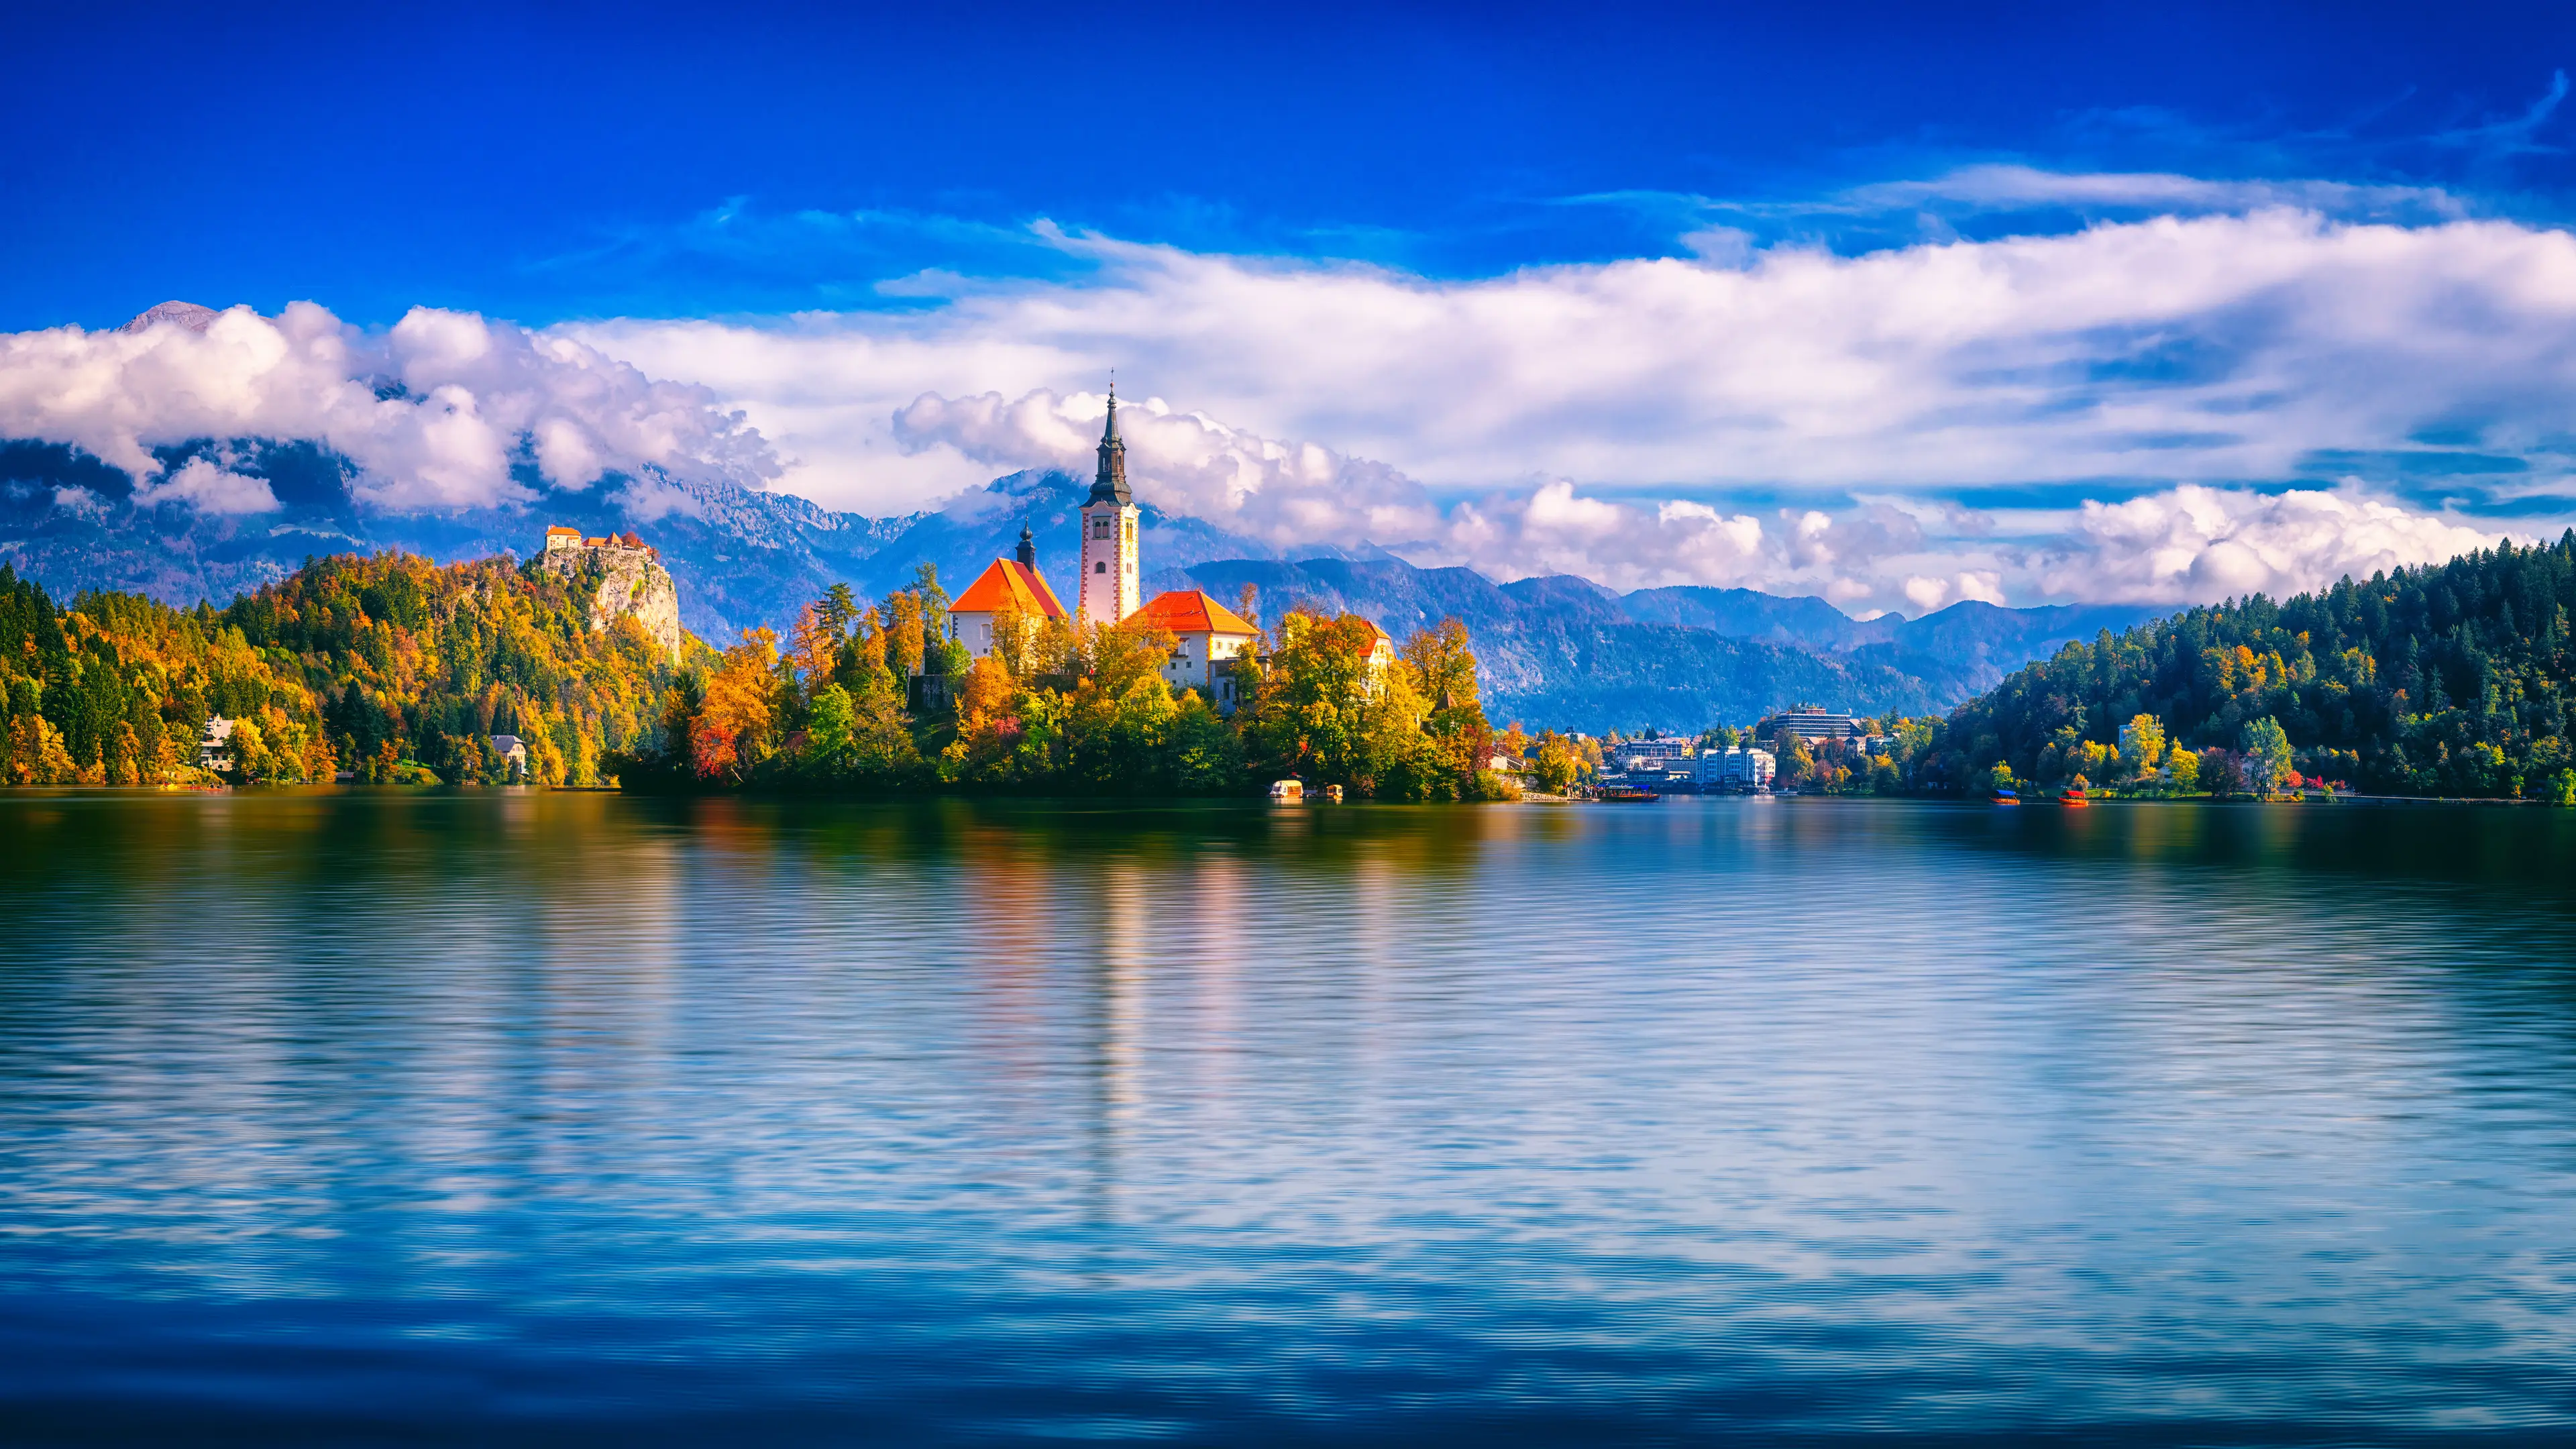 2-Day Adventure-filled Getaway for Couples in Lake Bled, Slovenia